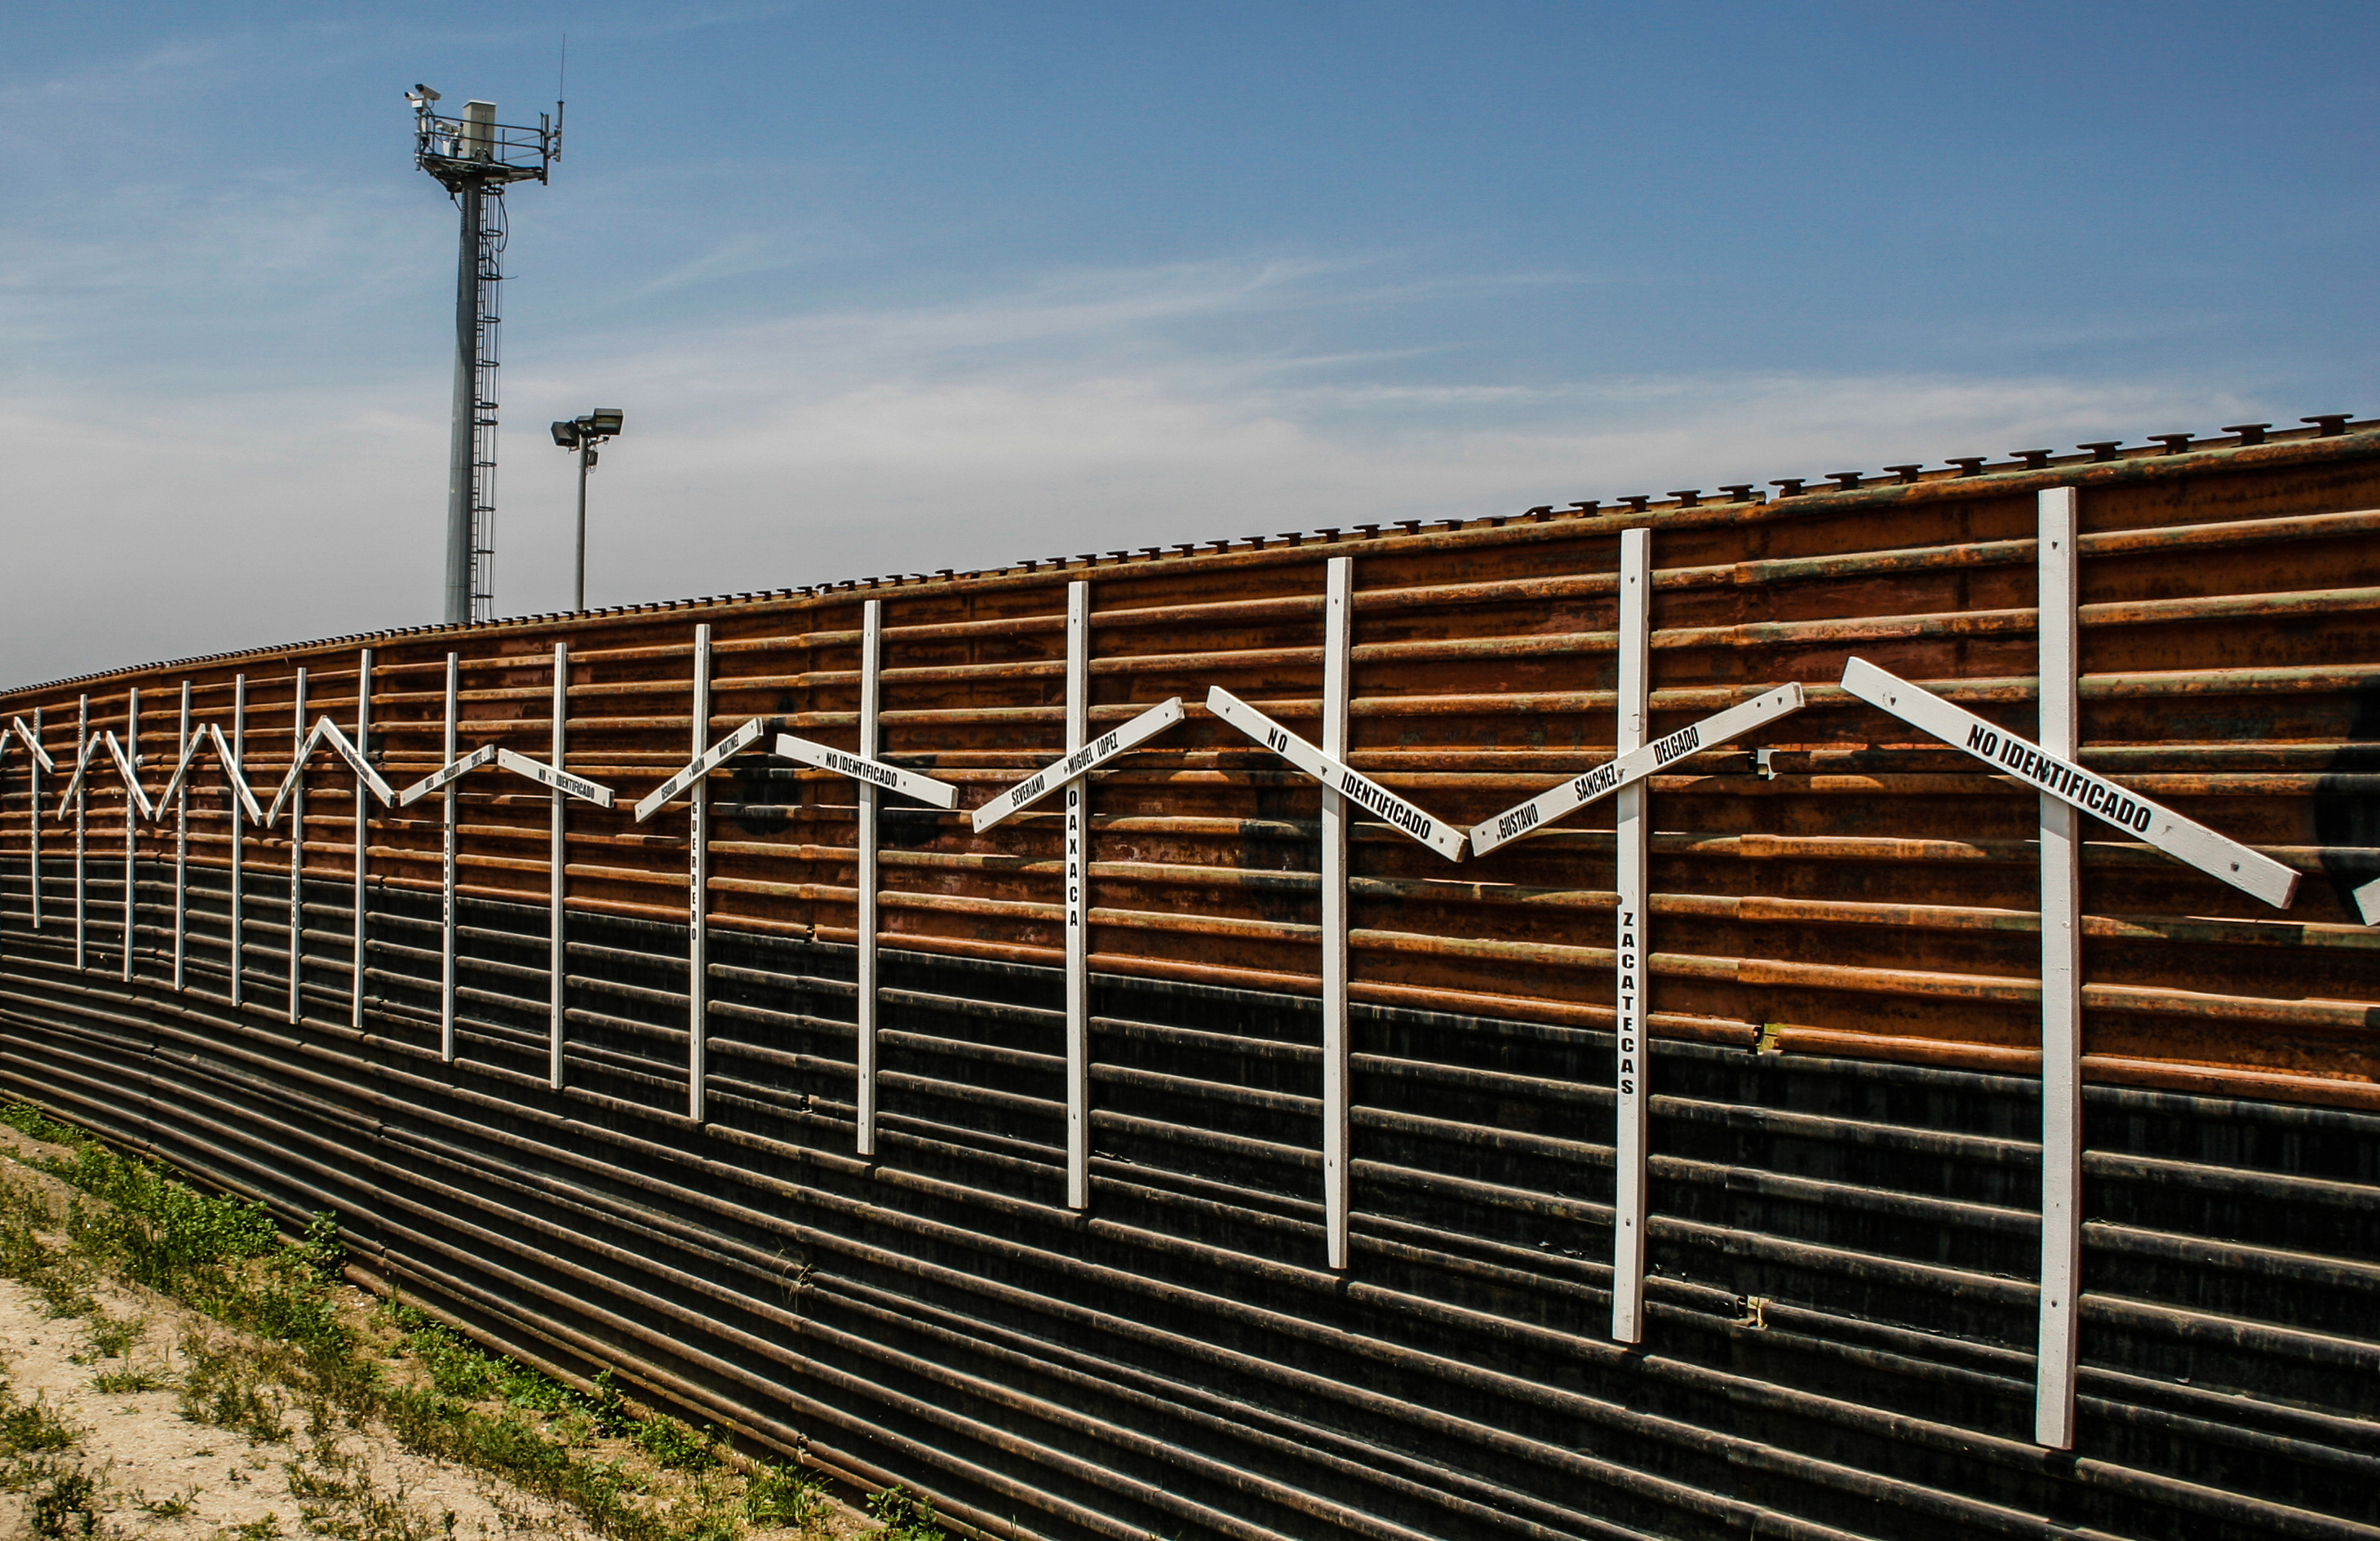 Three organizations sue to block $3.8 billion of military budget to be diverted to building border wall